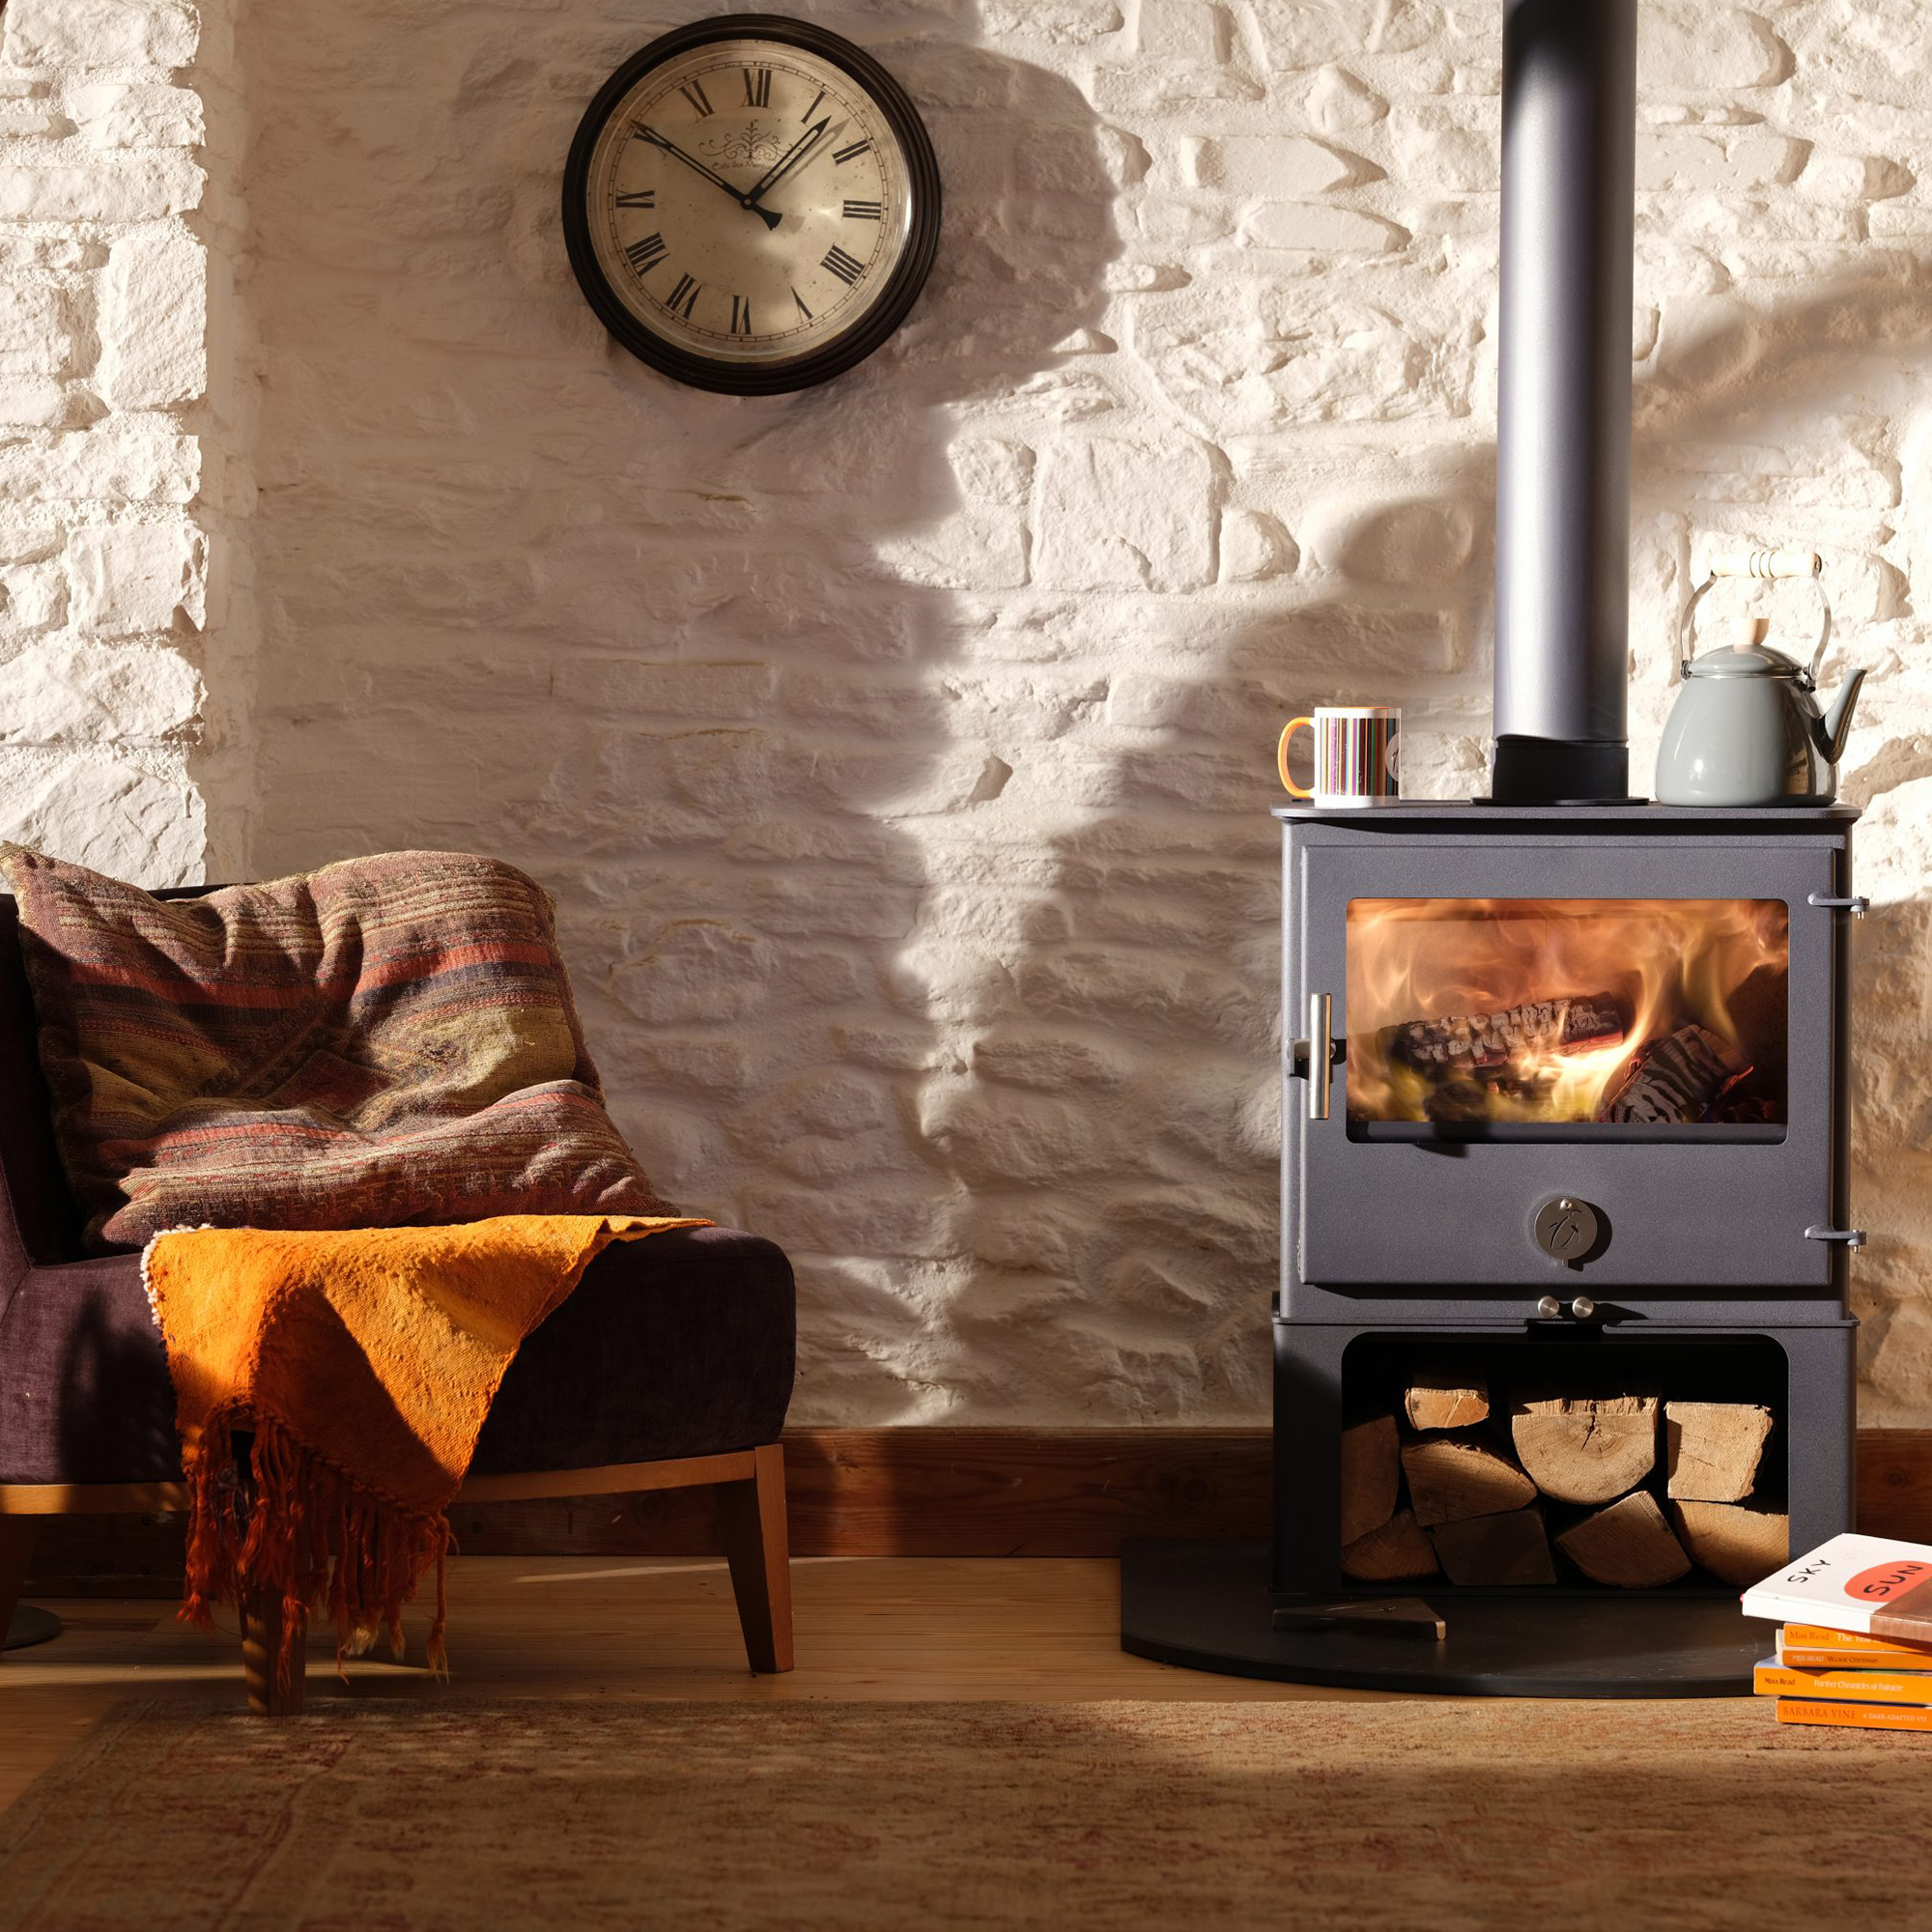 Wood Cook Stoves l Wood Burning Cook Stove